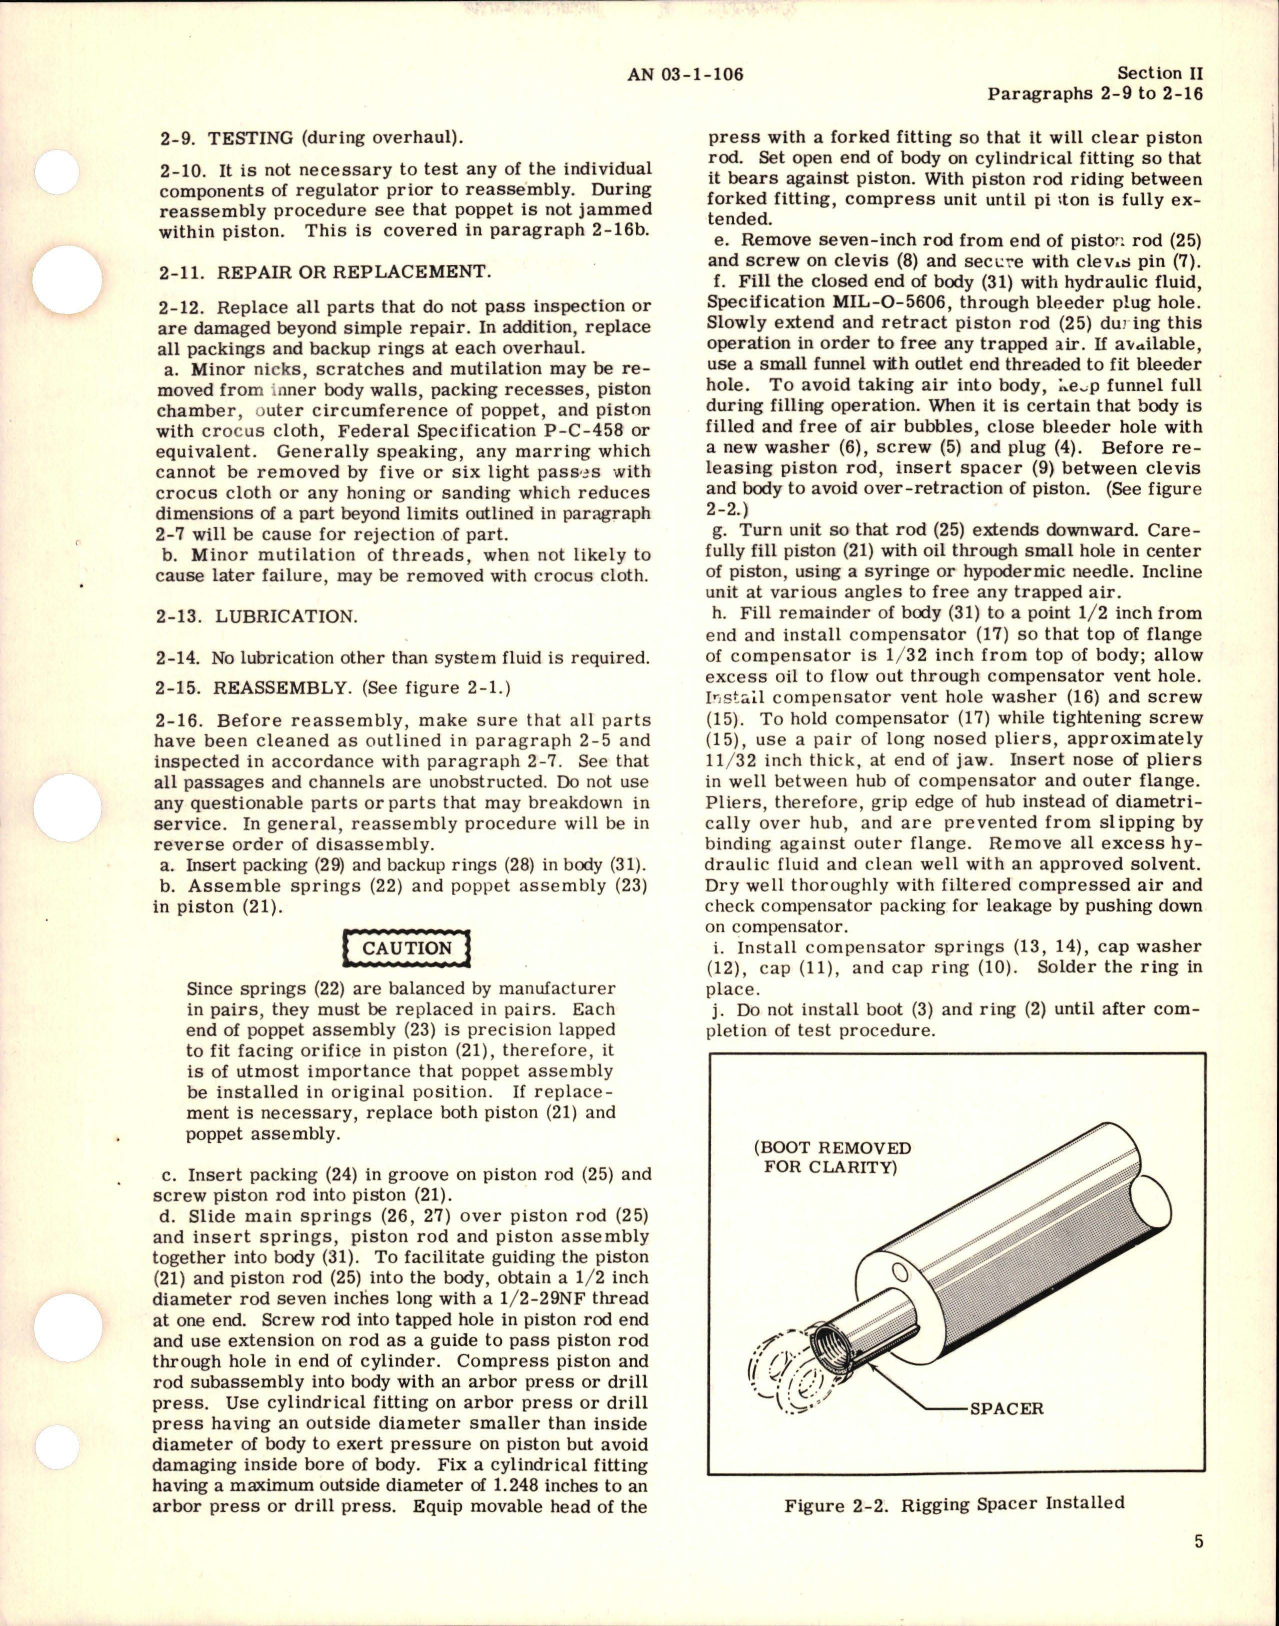 Sample page 7 from AirCorps Library document: Overhaul Instructions for Cable Tension Regulators - V720-3, V720-8-1, and V750-1